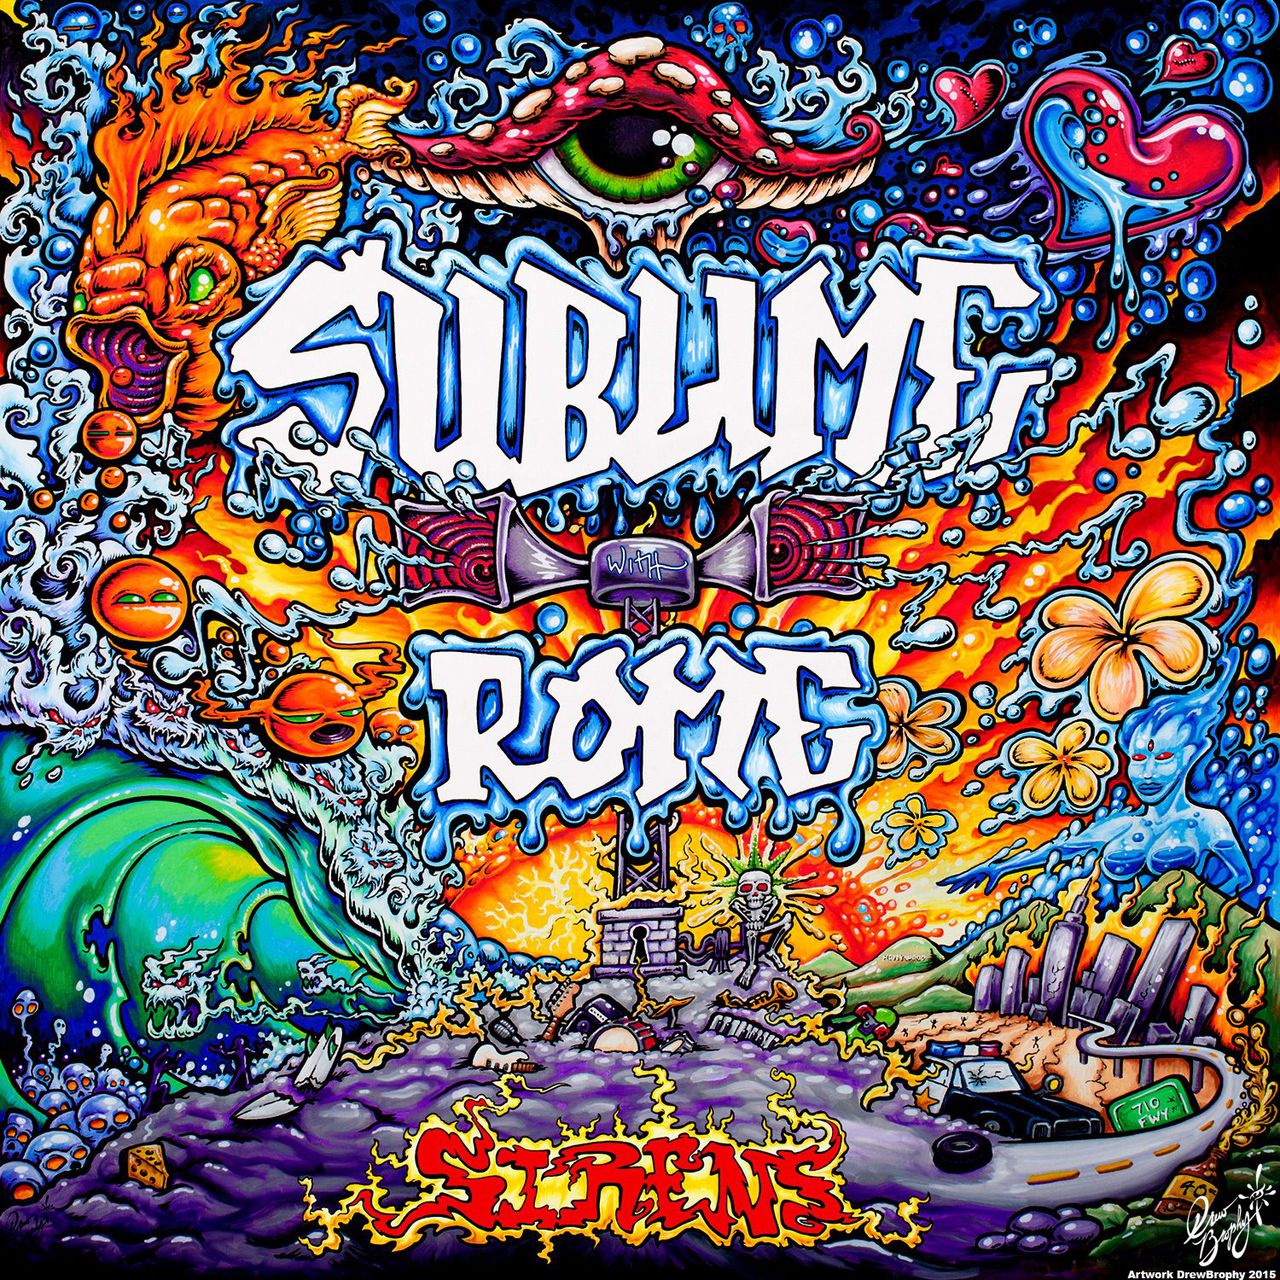 SUBLIME WITH ROME SIRENS Original Paintings SIGNED By BAND Paint Pen on Canvas